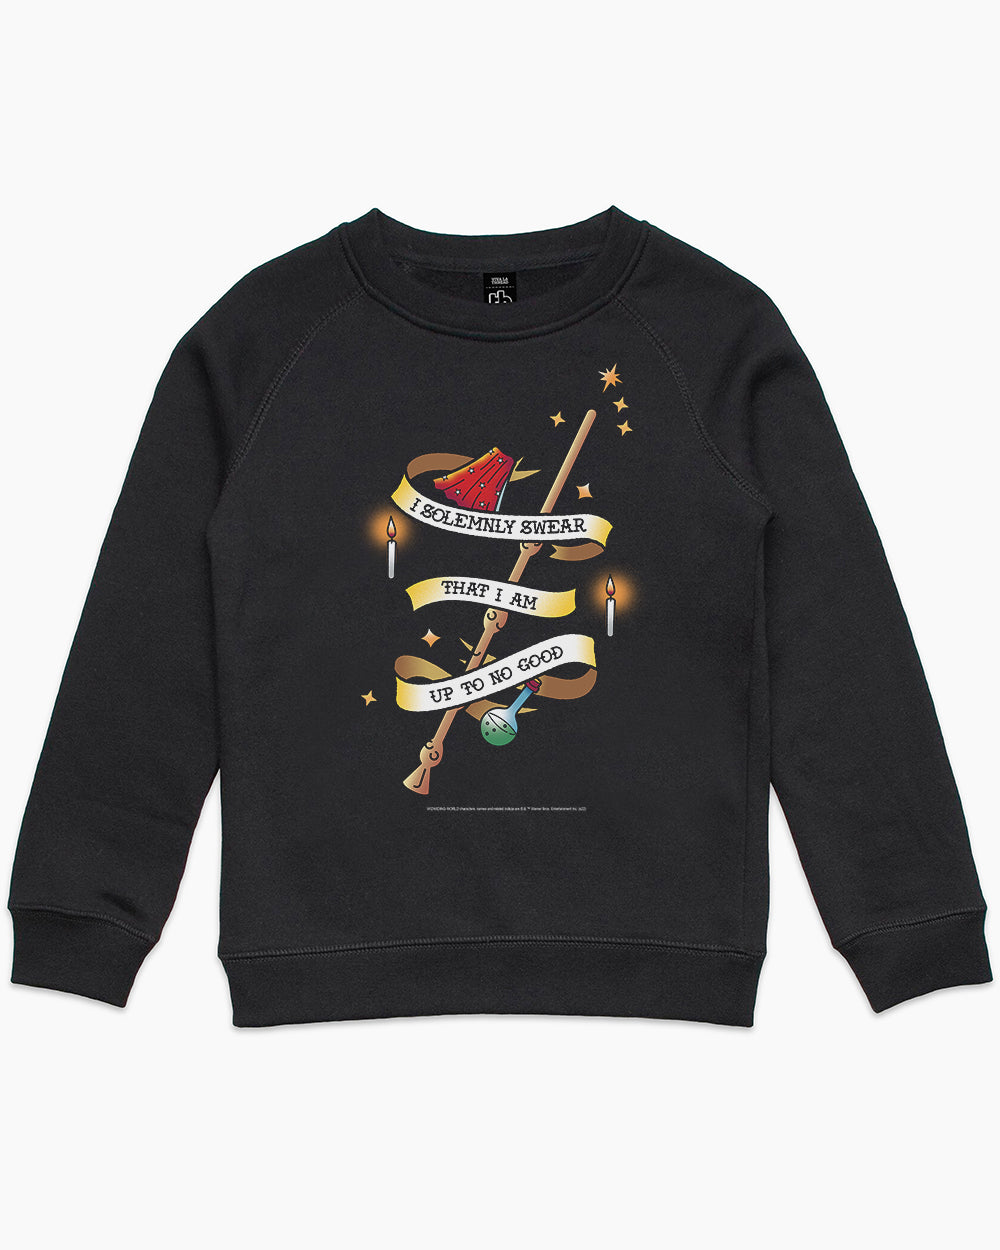 I Solemnly Swear That I Am Up to No Good Kids Sweater Australia Online #colour_black